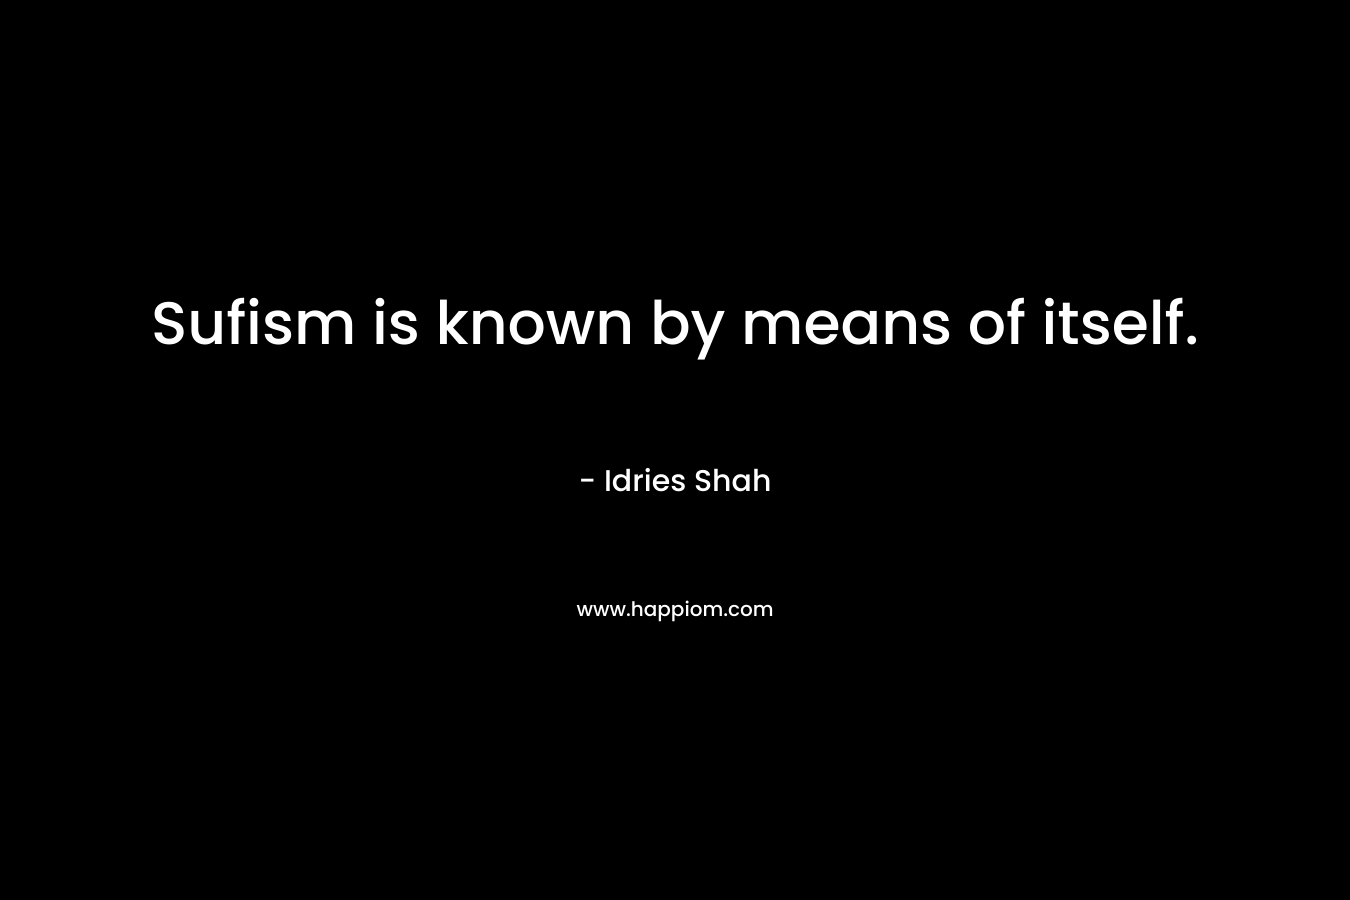 Sufism is known by means of itself.